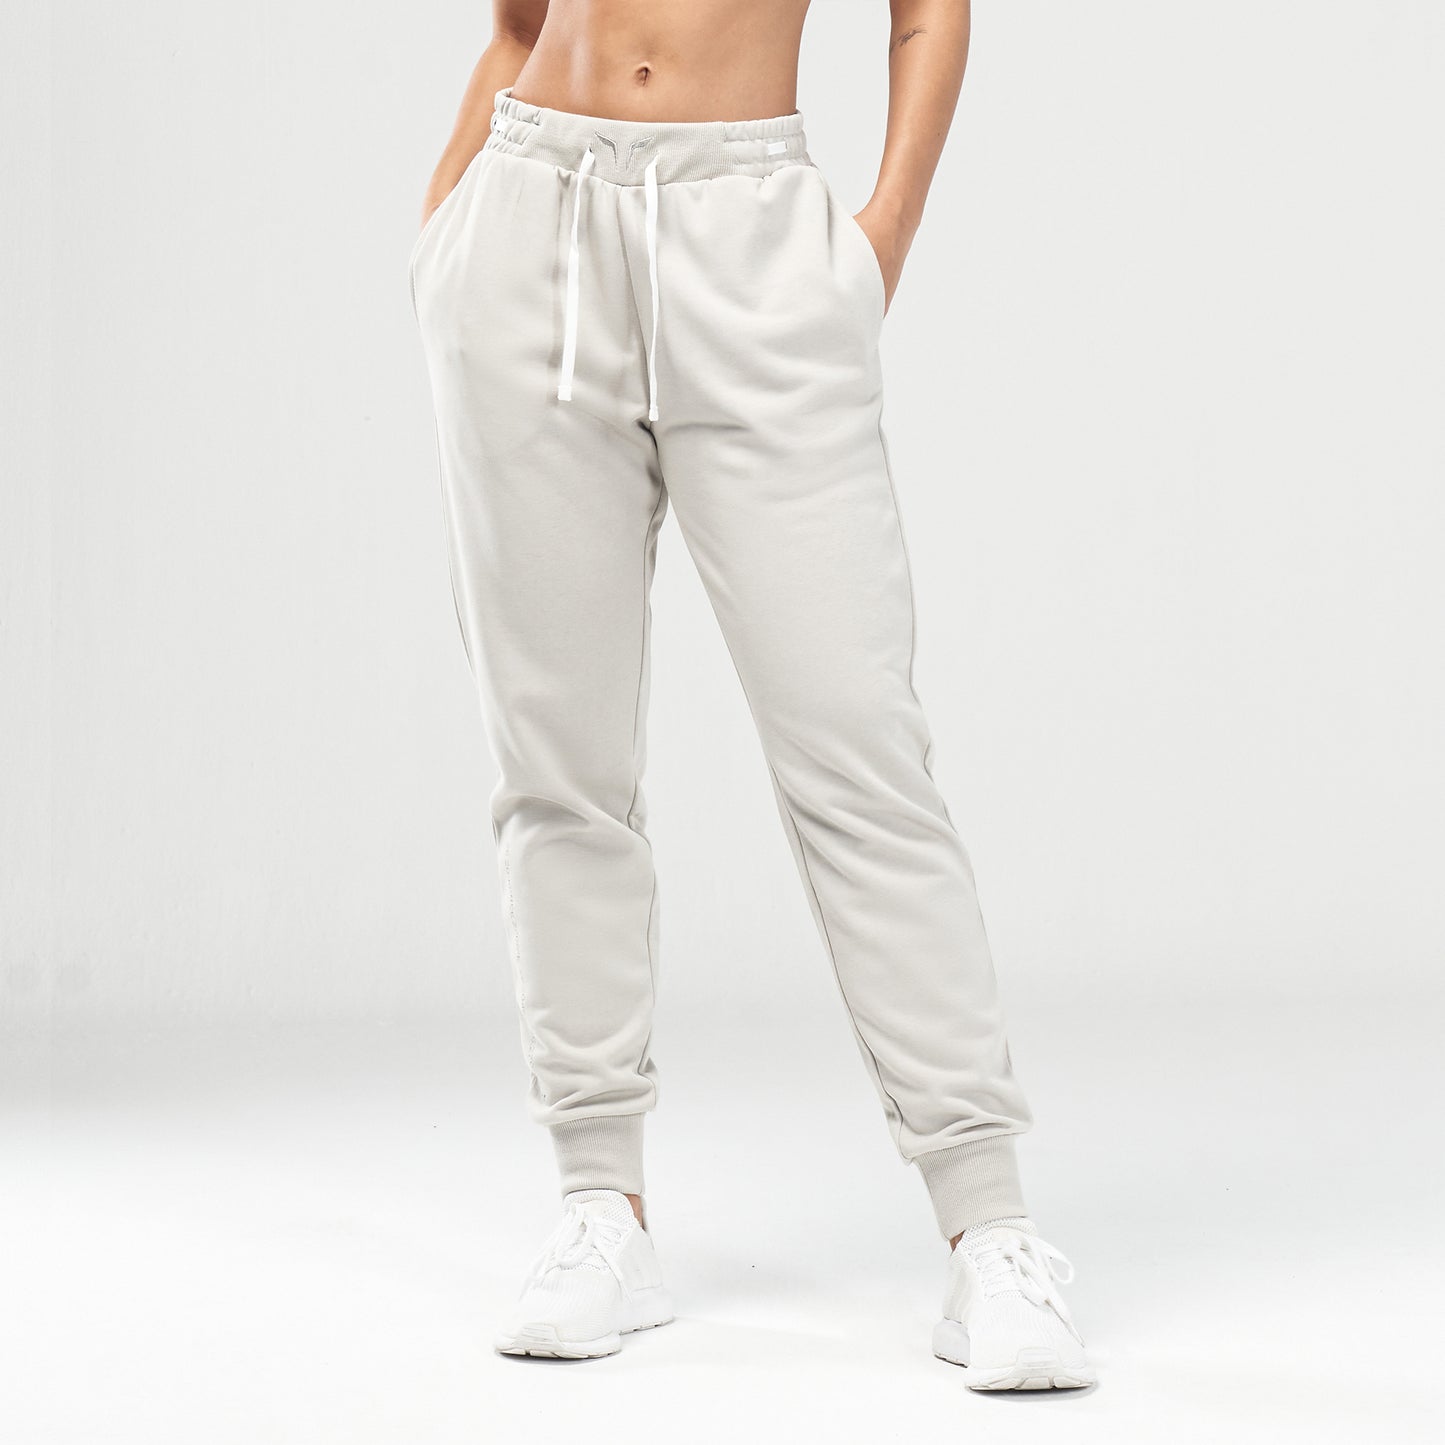 squatwolf-workout-clothes-code-relaxed-joggers-grey-gym-pants-for-women